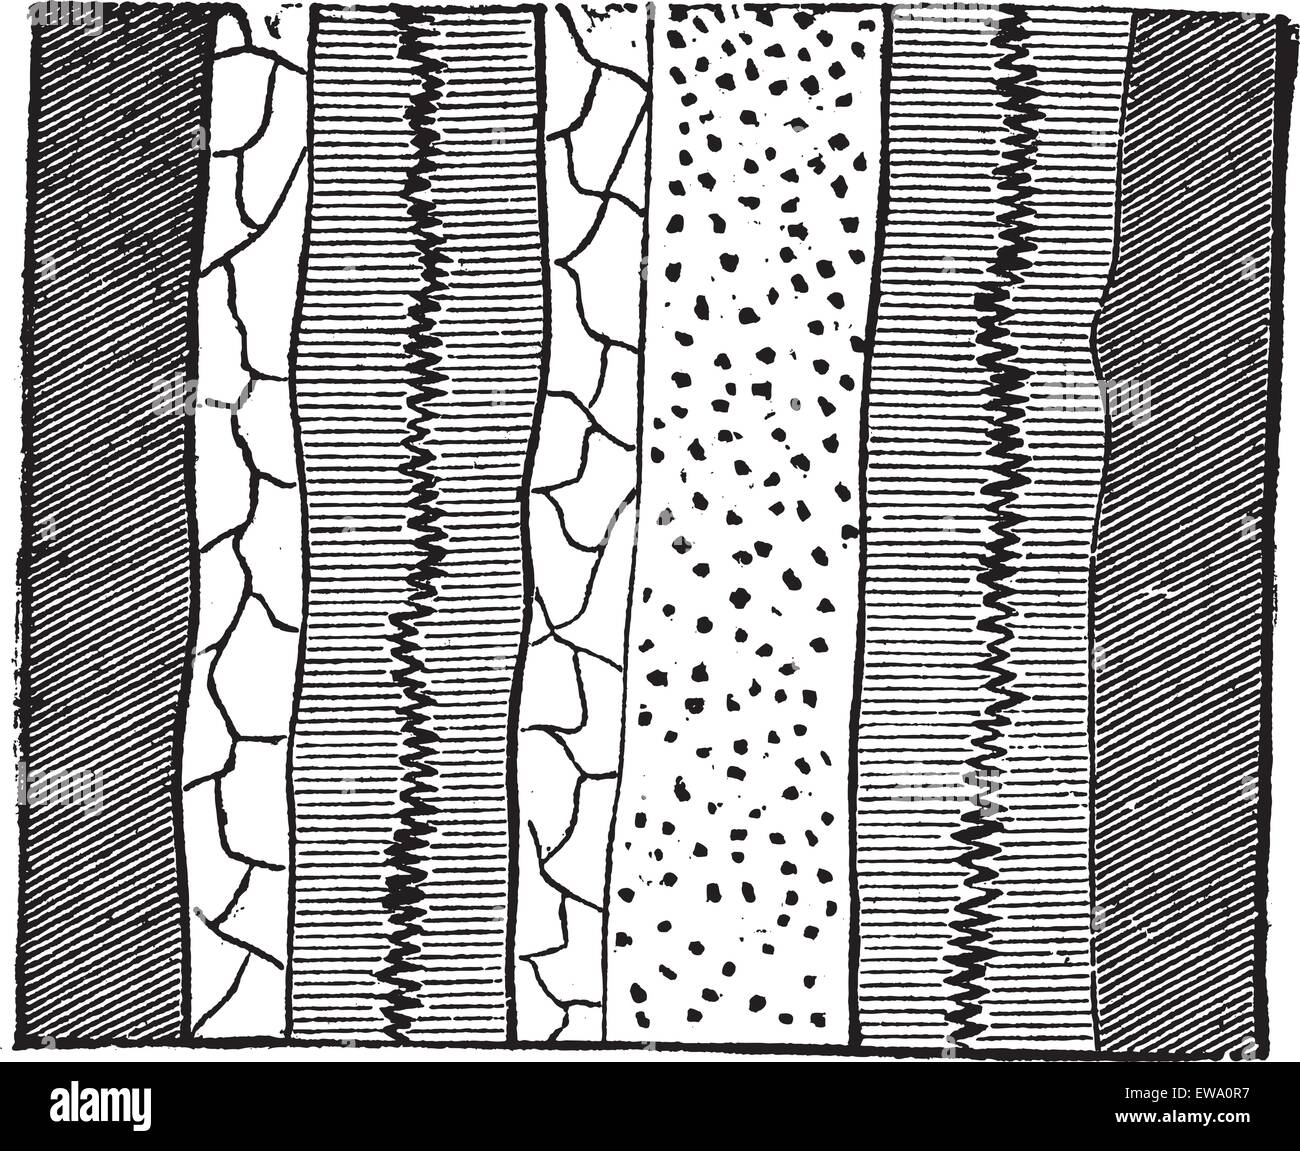 Geological Vein, illustration showing two veins splitting two separate layers of quartz into four portions, vintage engraved illustration. Trousset encyclopedia (1886 - 1891). Stock Vector